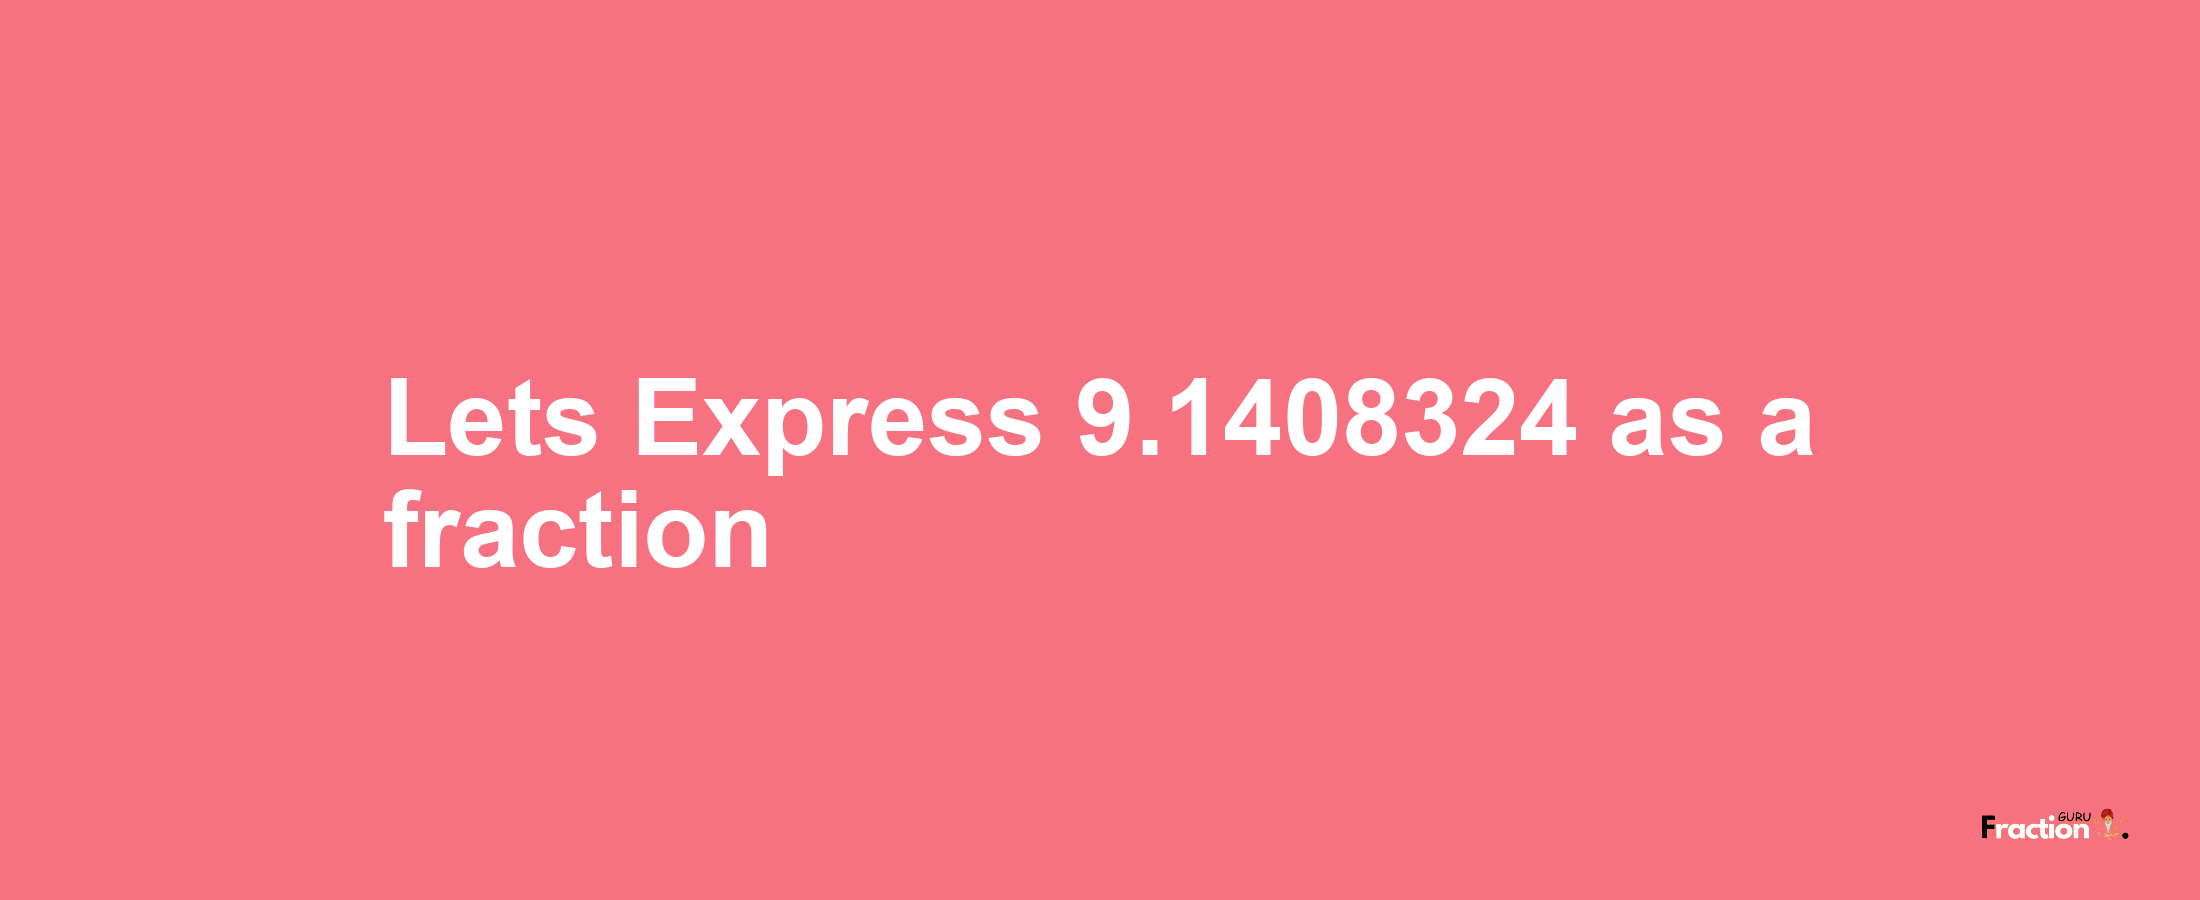 Lets Express 9.1408324 as afraction